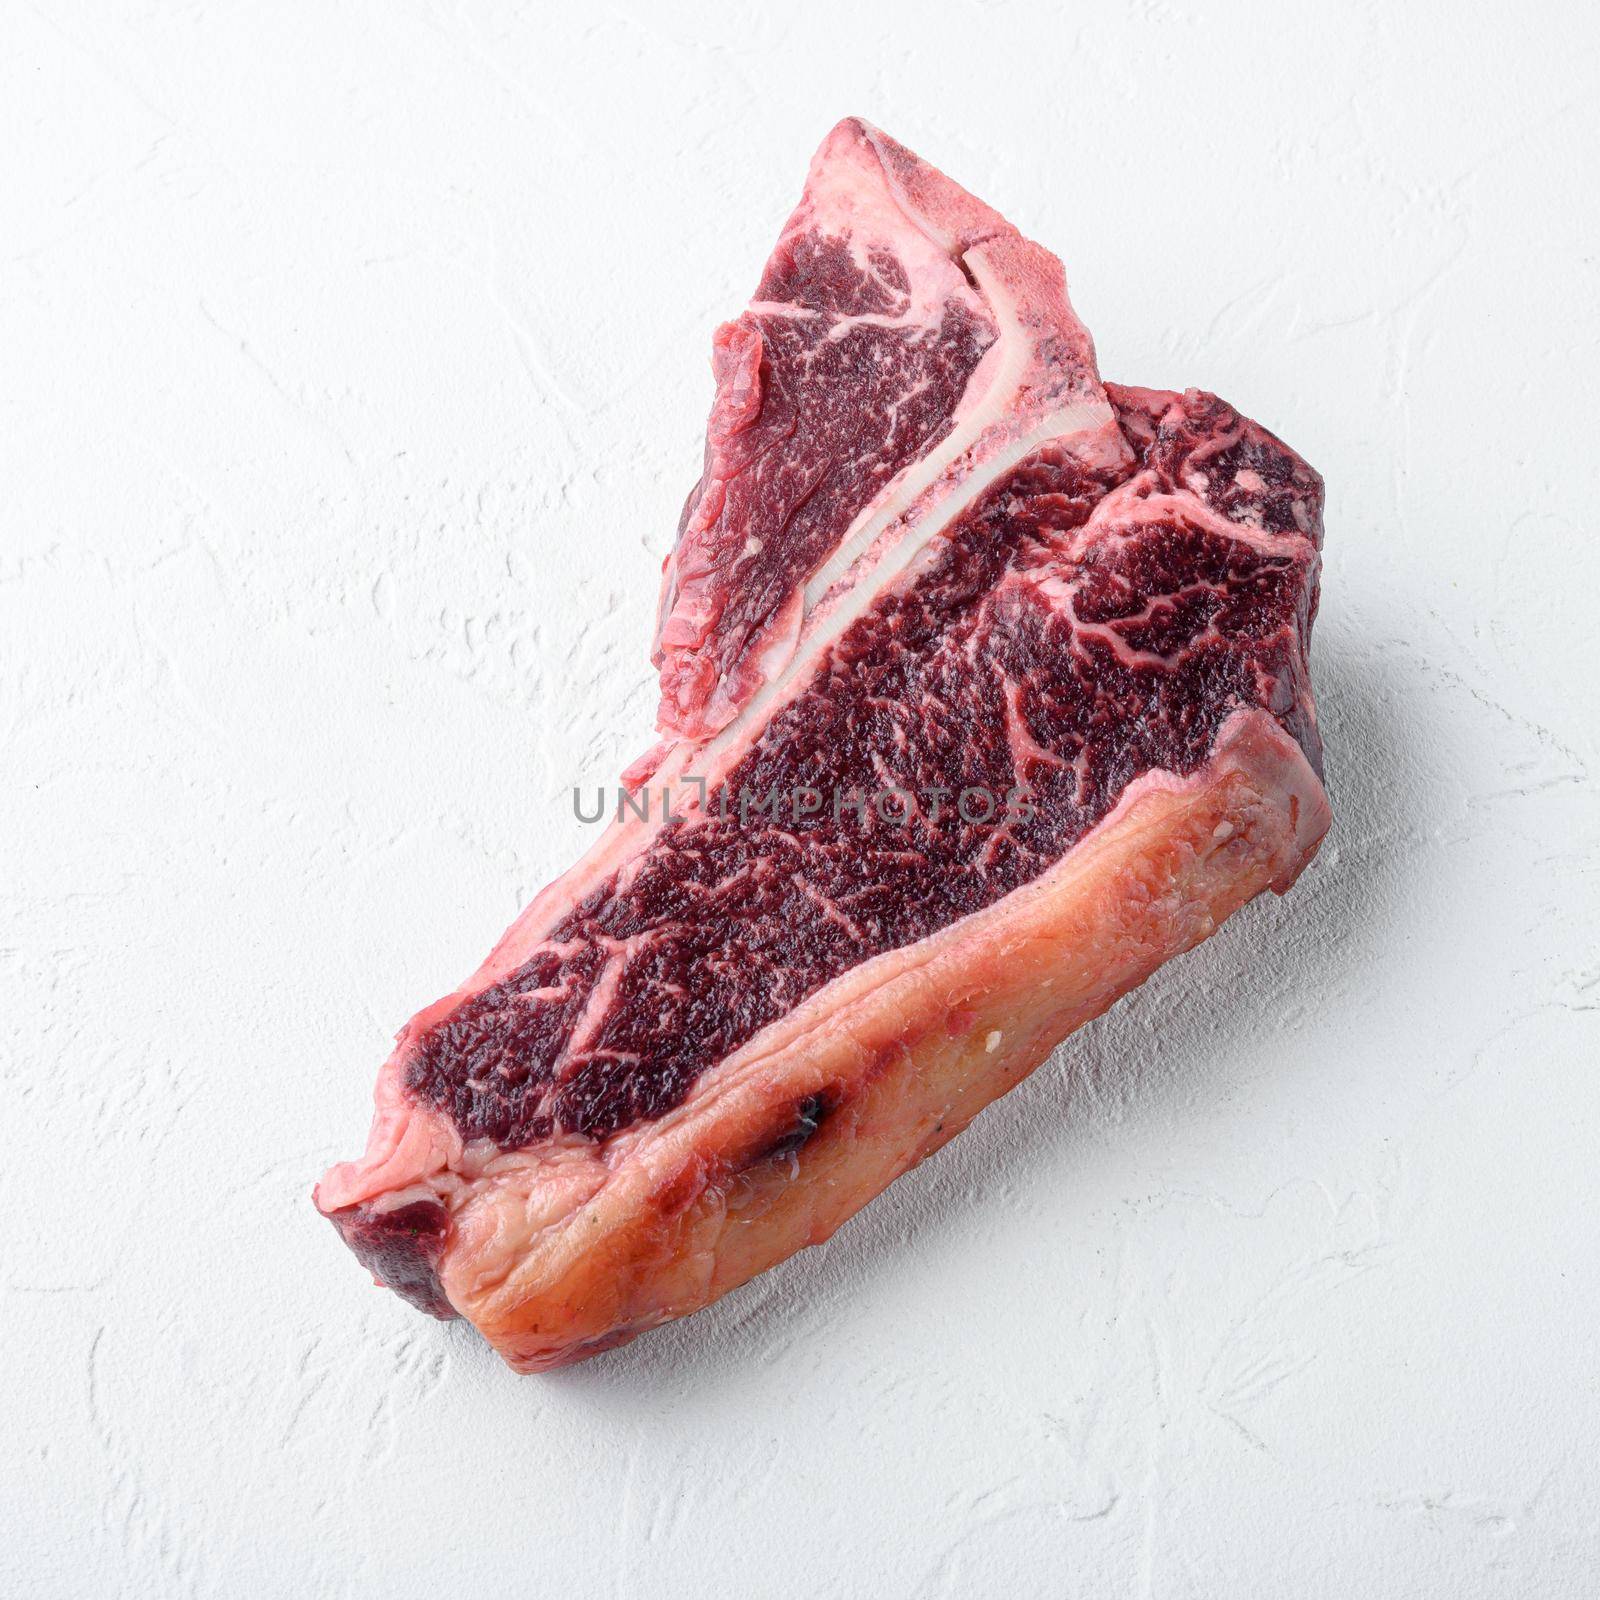 Dry-aged Raw T-bone or porterhouse beef marbled meat prime steak set, on white stone background, square format